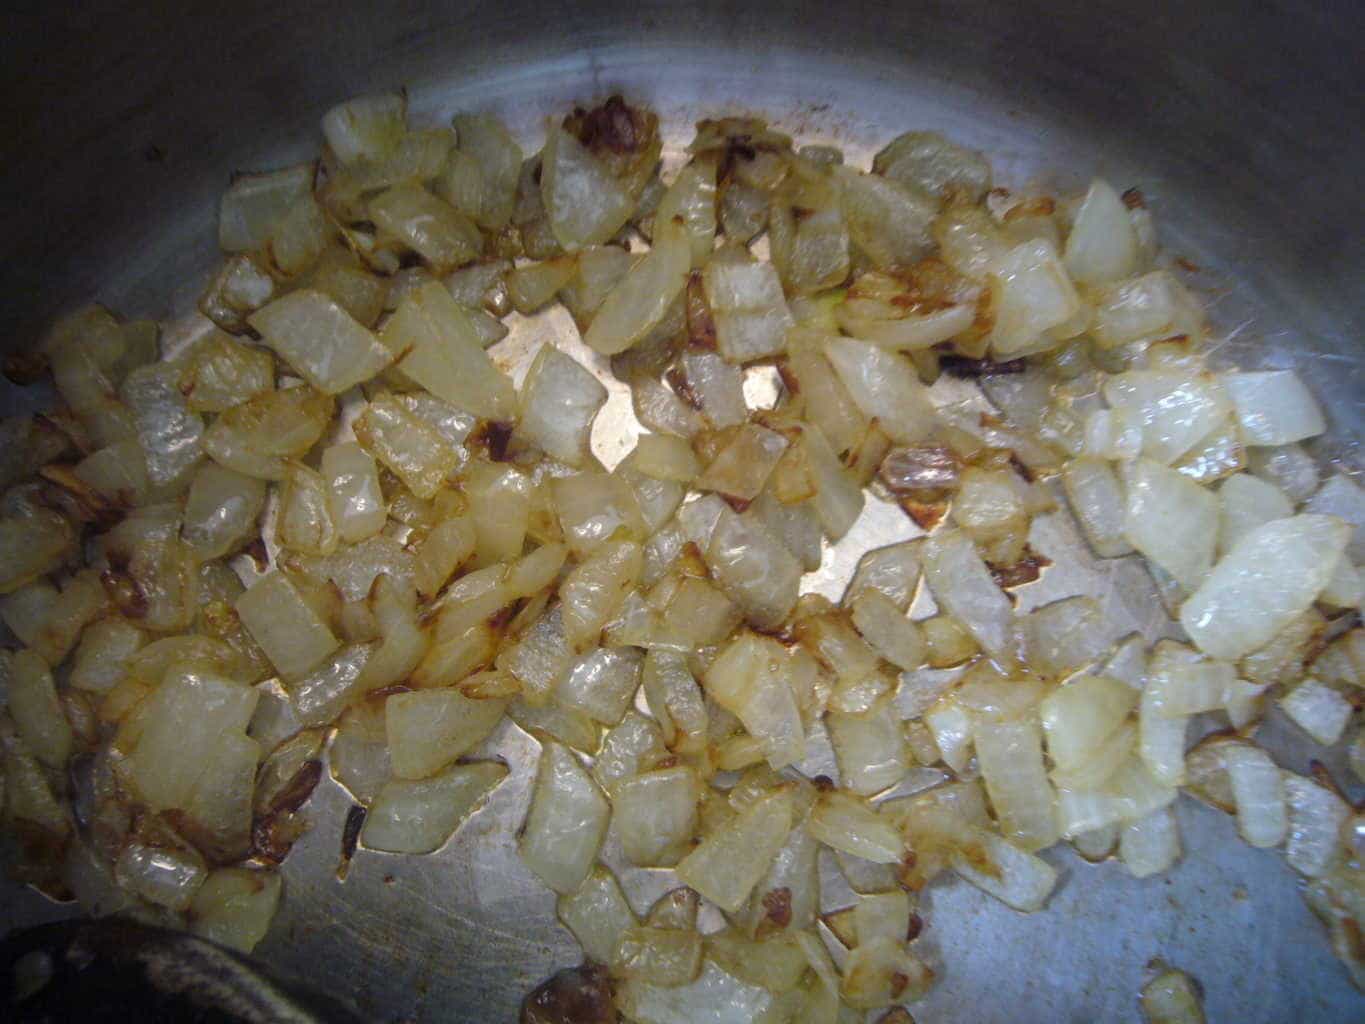 Onions sauteed with olive oil.